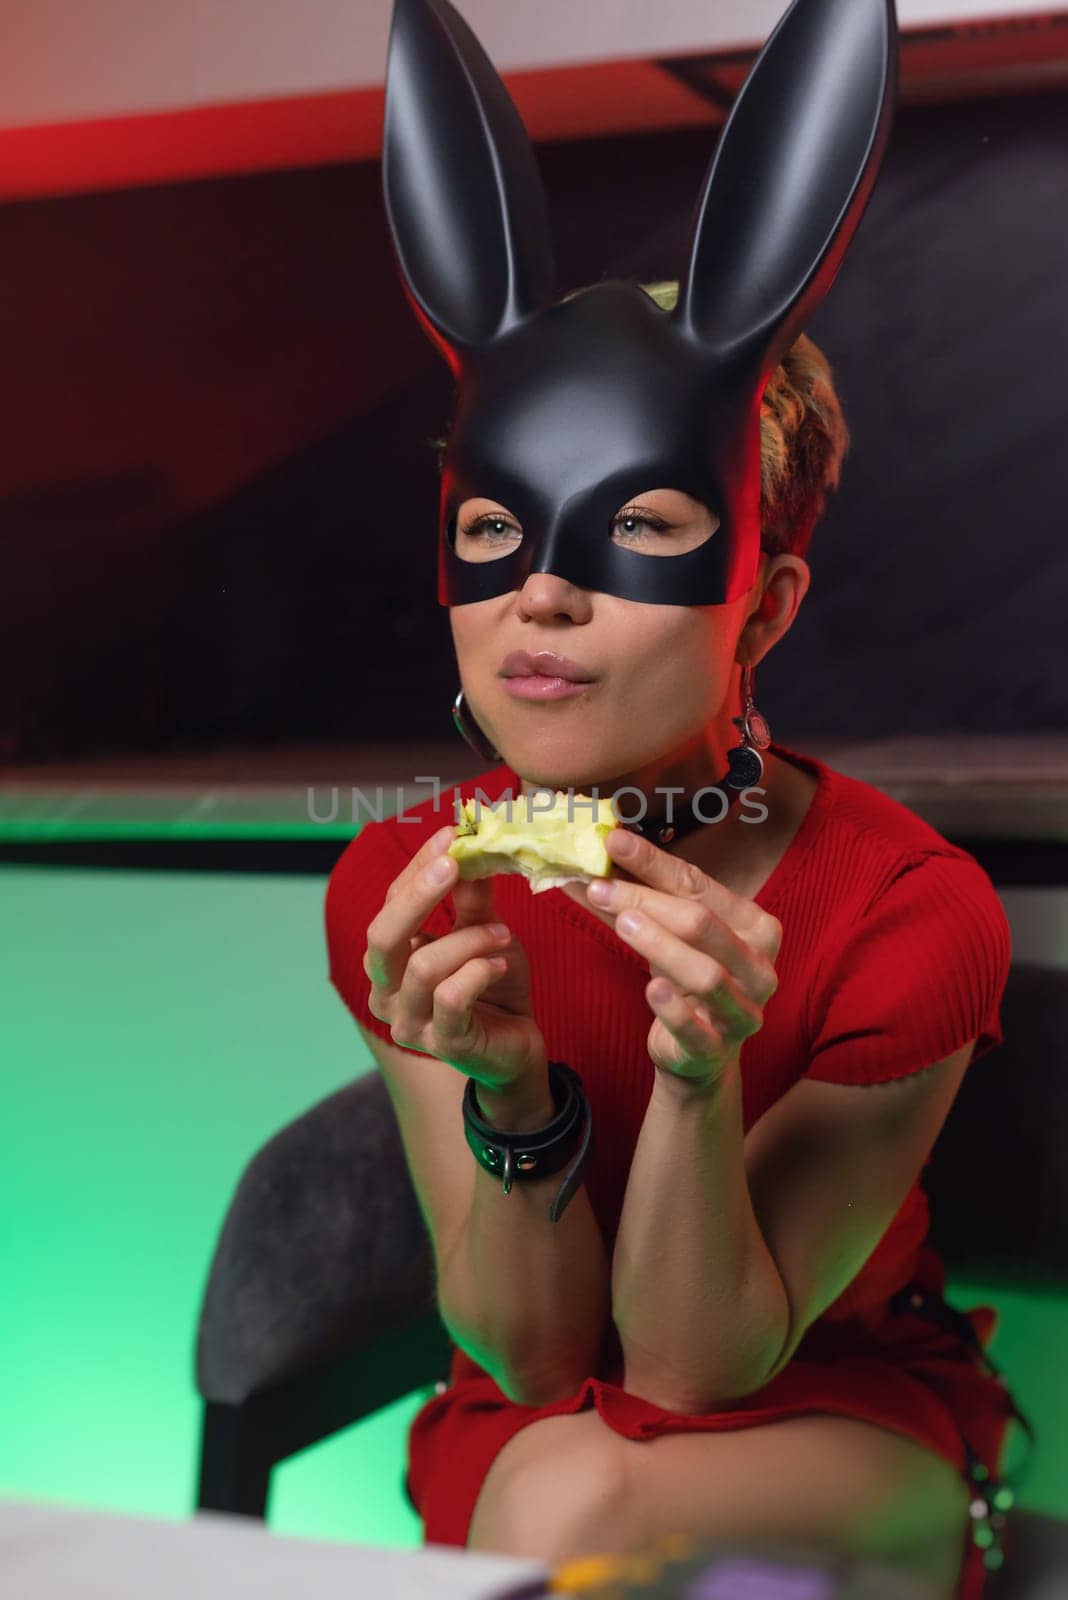 beautiful girl in a bdsm rabbit mask and a bright red dress eats an apple in the kitchen in neon light promoting a healthy lifestyle vegetarianism by Rotozey